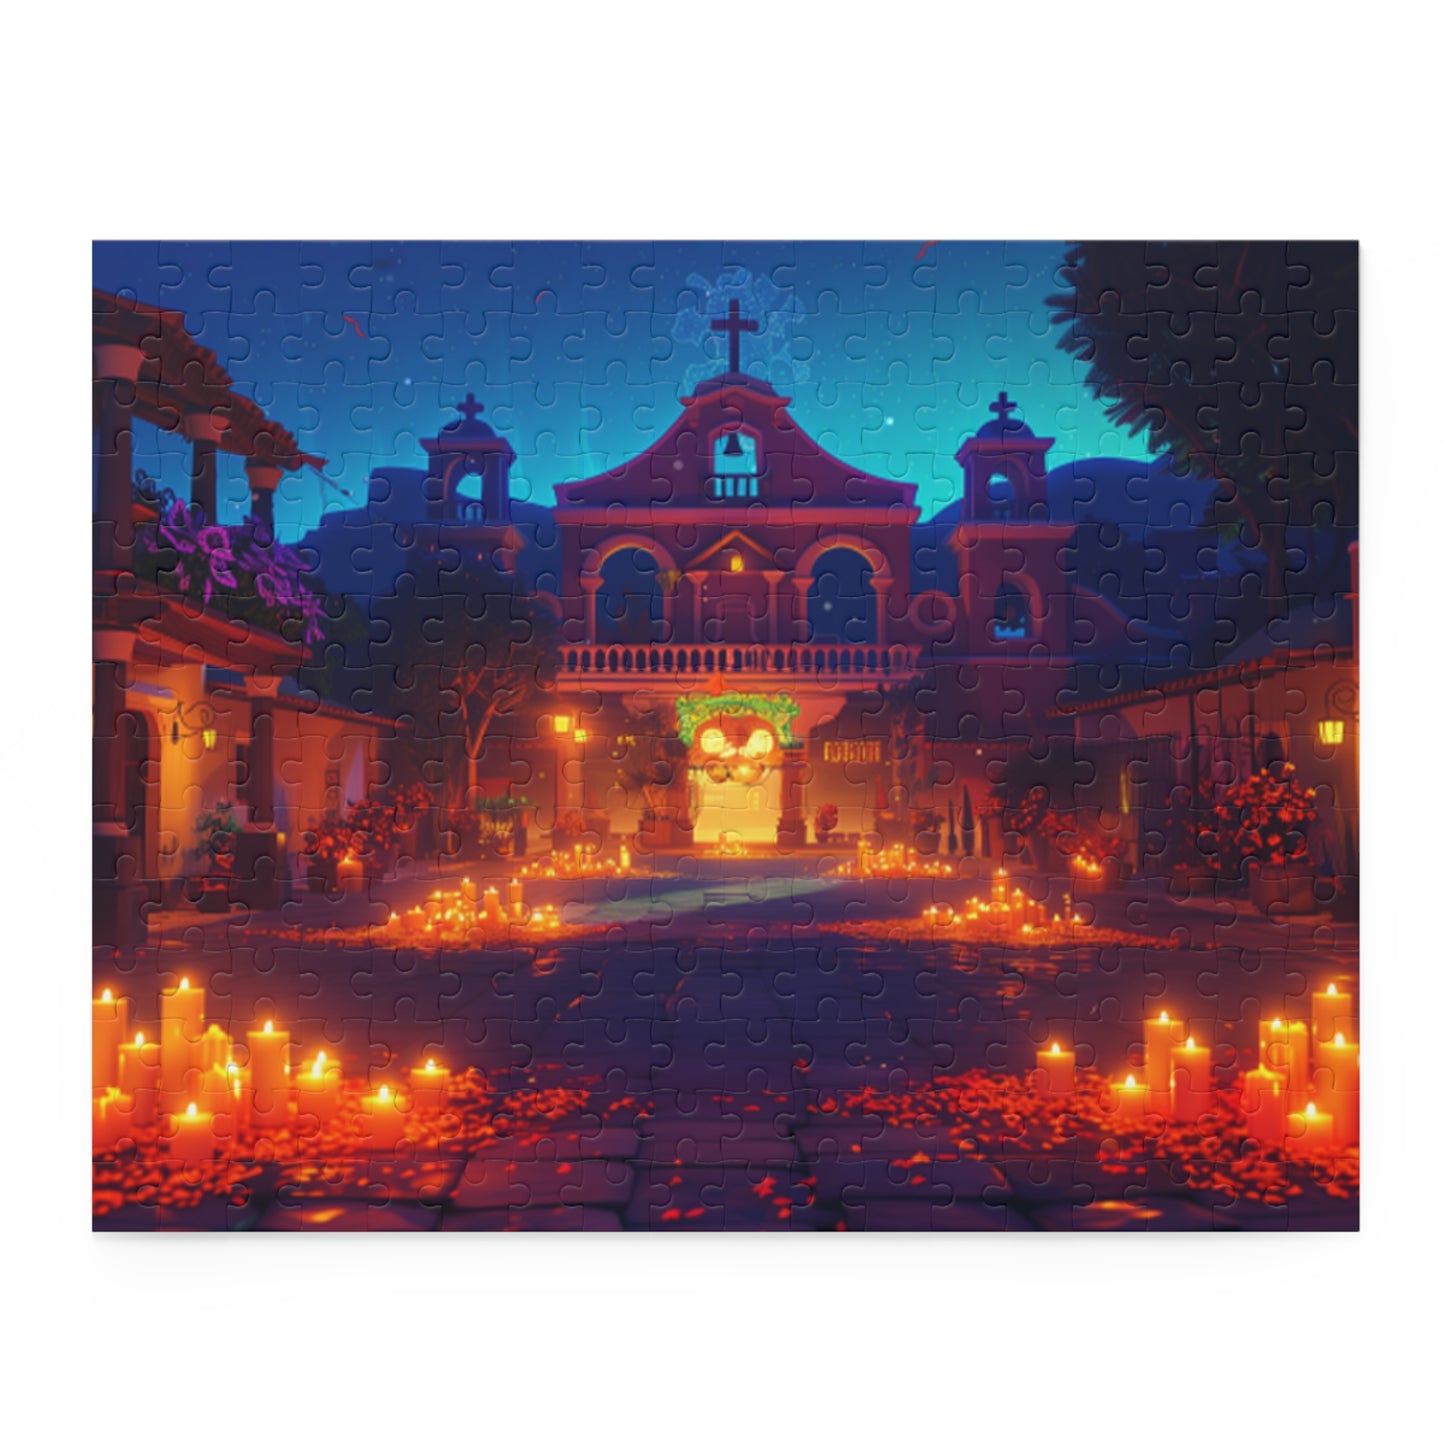 Mexican Art Church Candle Night Retro Jigsaw Puzzle Adult Birthday Business Jigsaw Puzzle Gift for Him Funny Humorous Indoor Outdoor Game Gift For Her Online-3